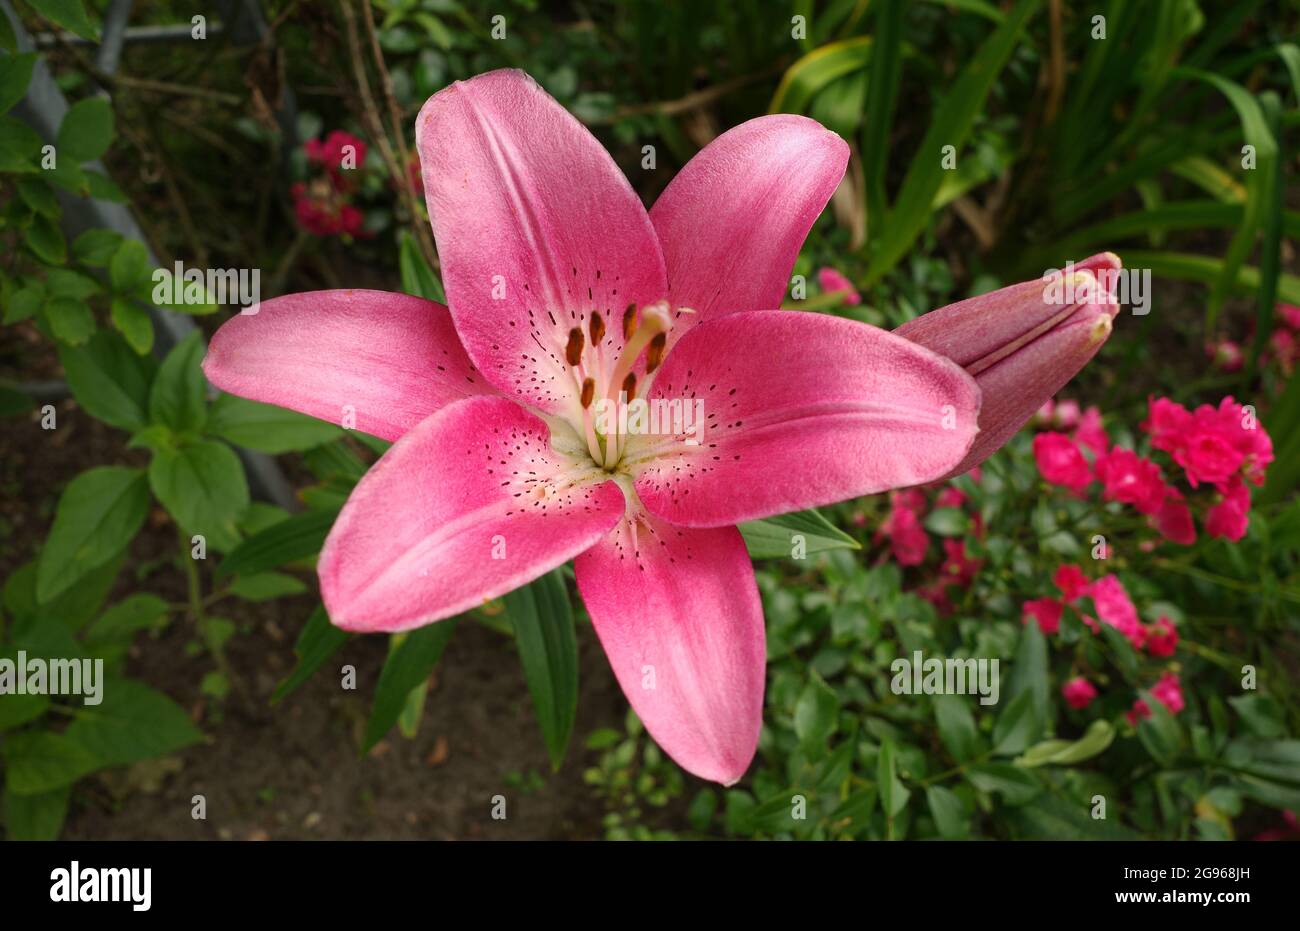 Beautiful pink lily with pink roses in the background. It's an asiatic hybrid. The color is old pink with white in the middle. The dots are dark red. Stock Photo